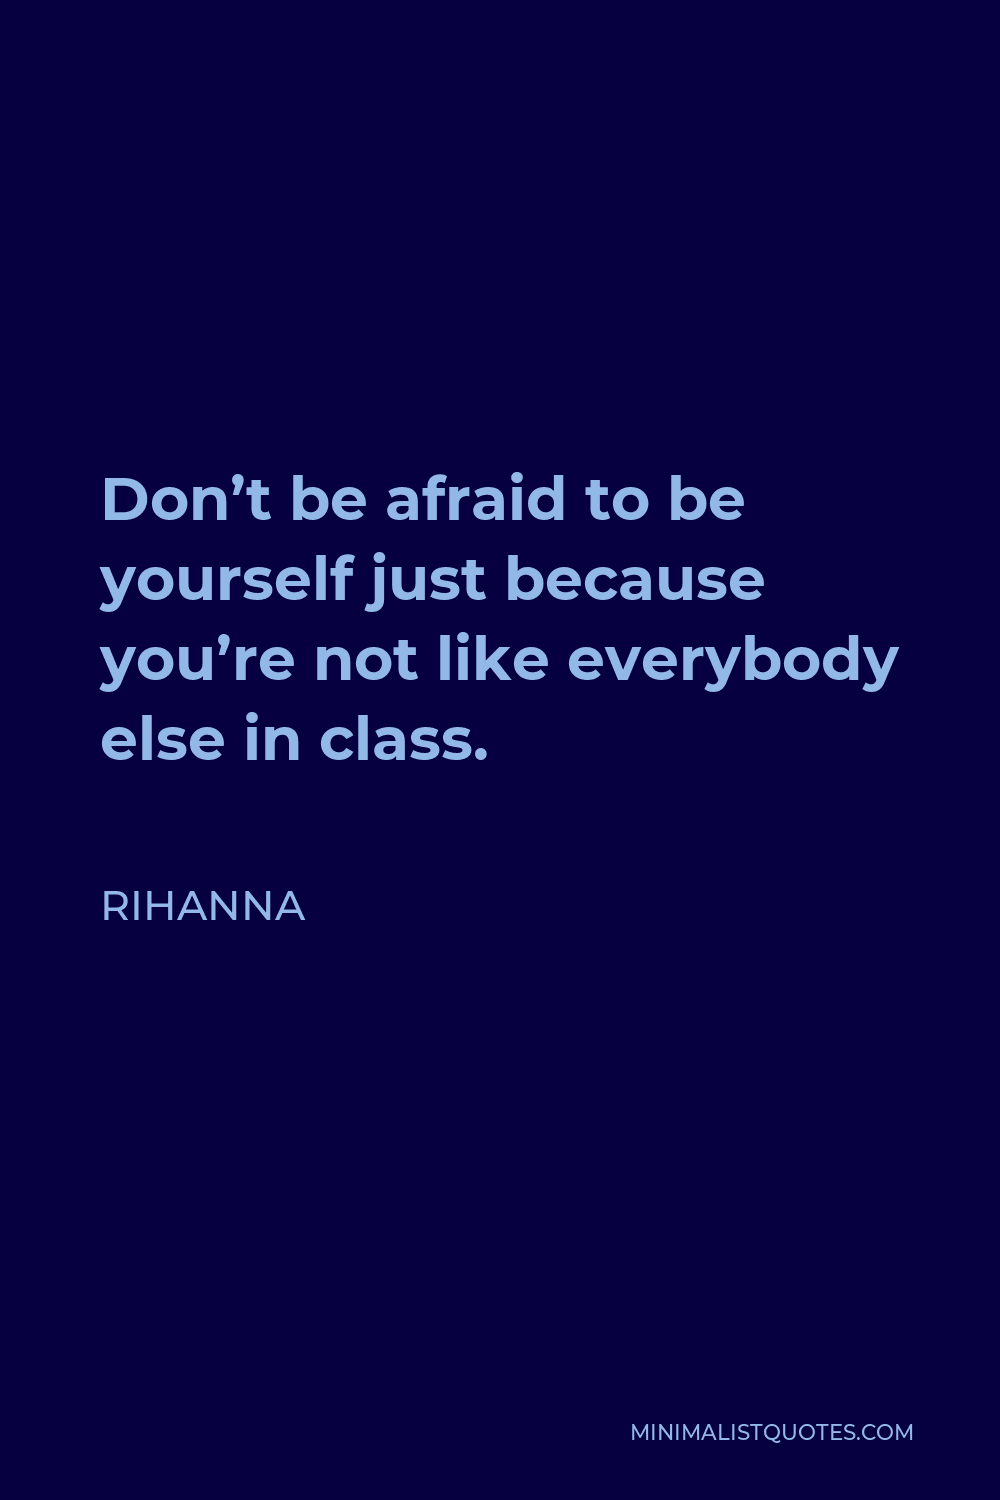 Rihanna Quote - Don’t be afraid to be yourself just because you’re not like everybody else in class.